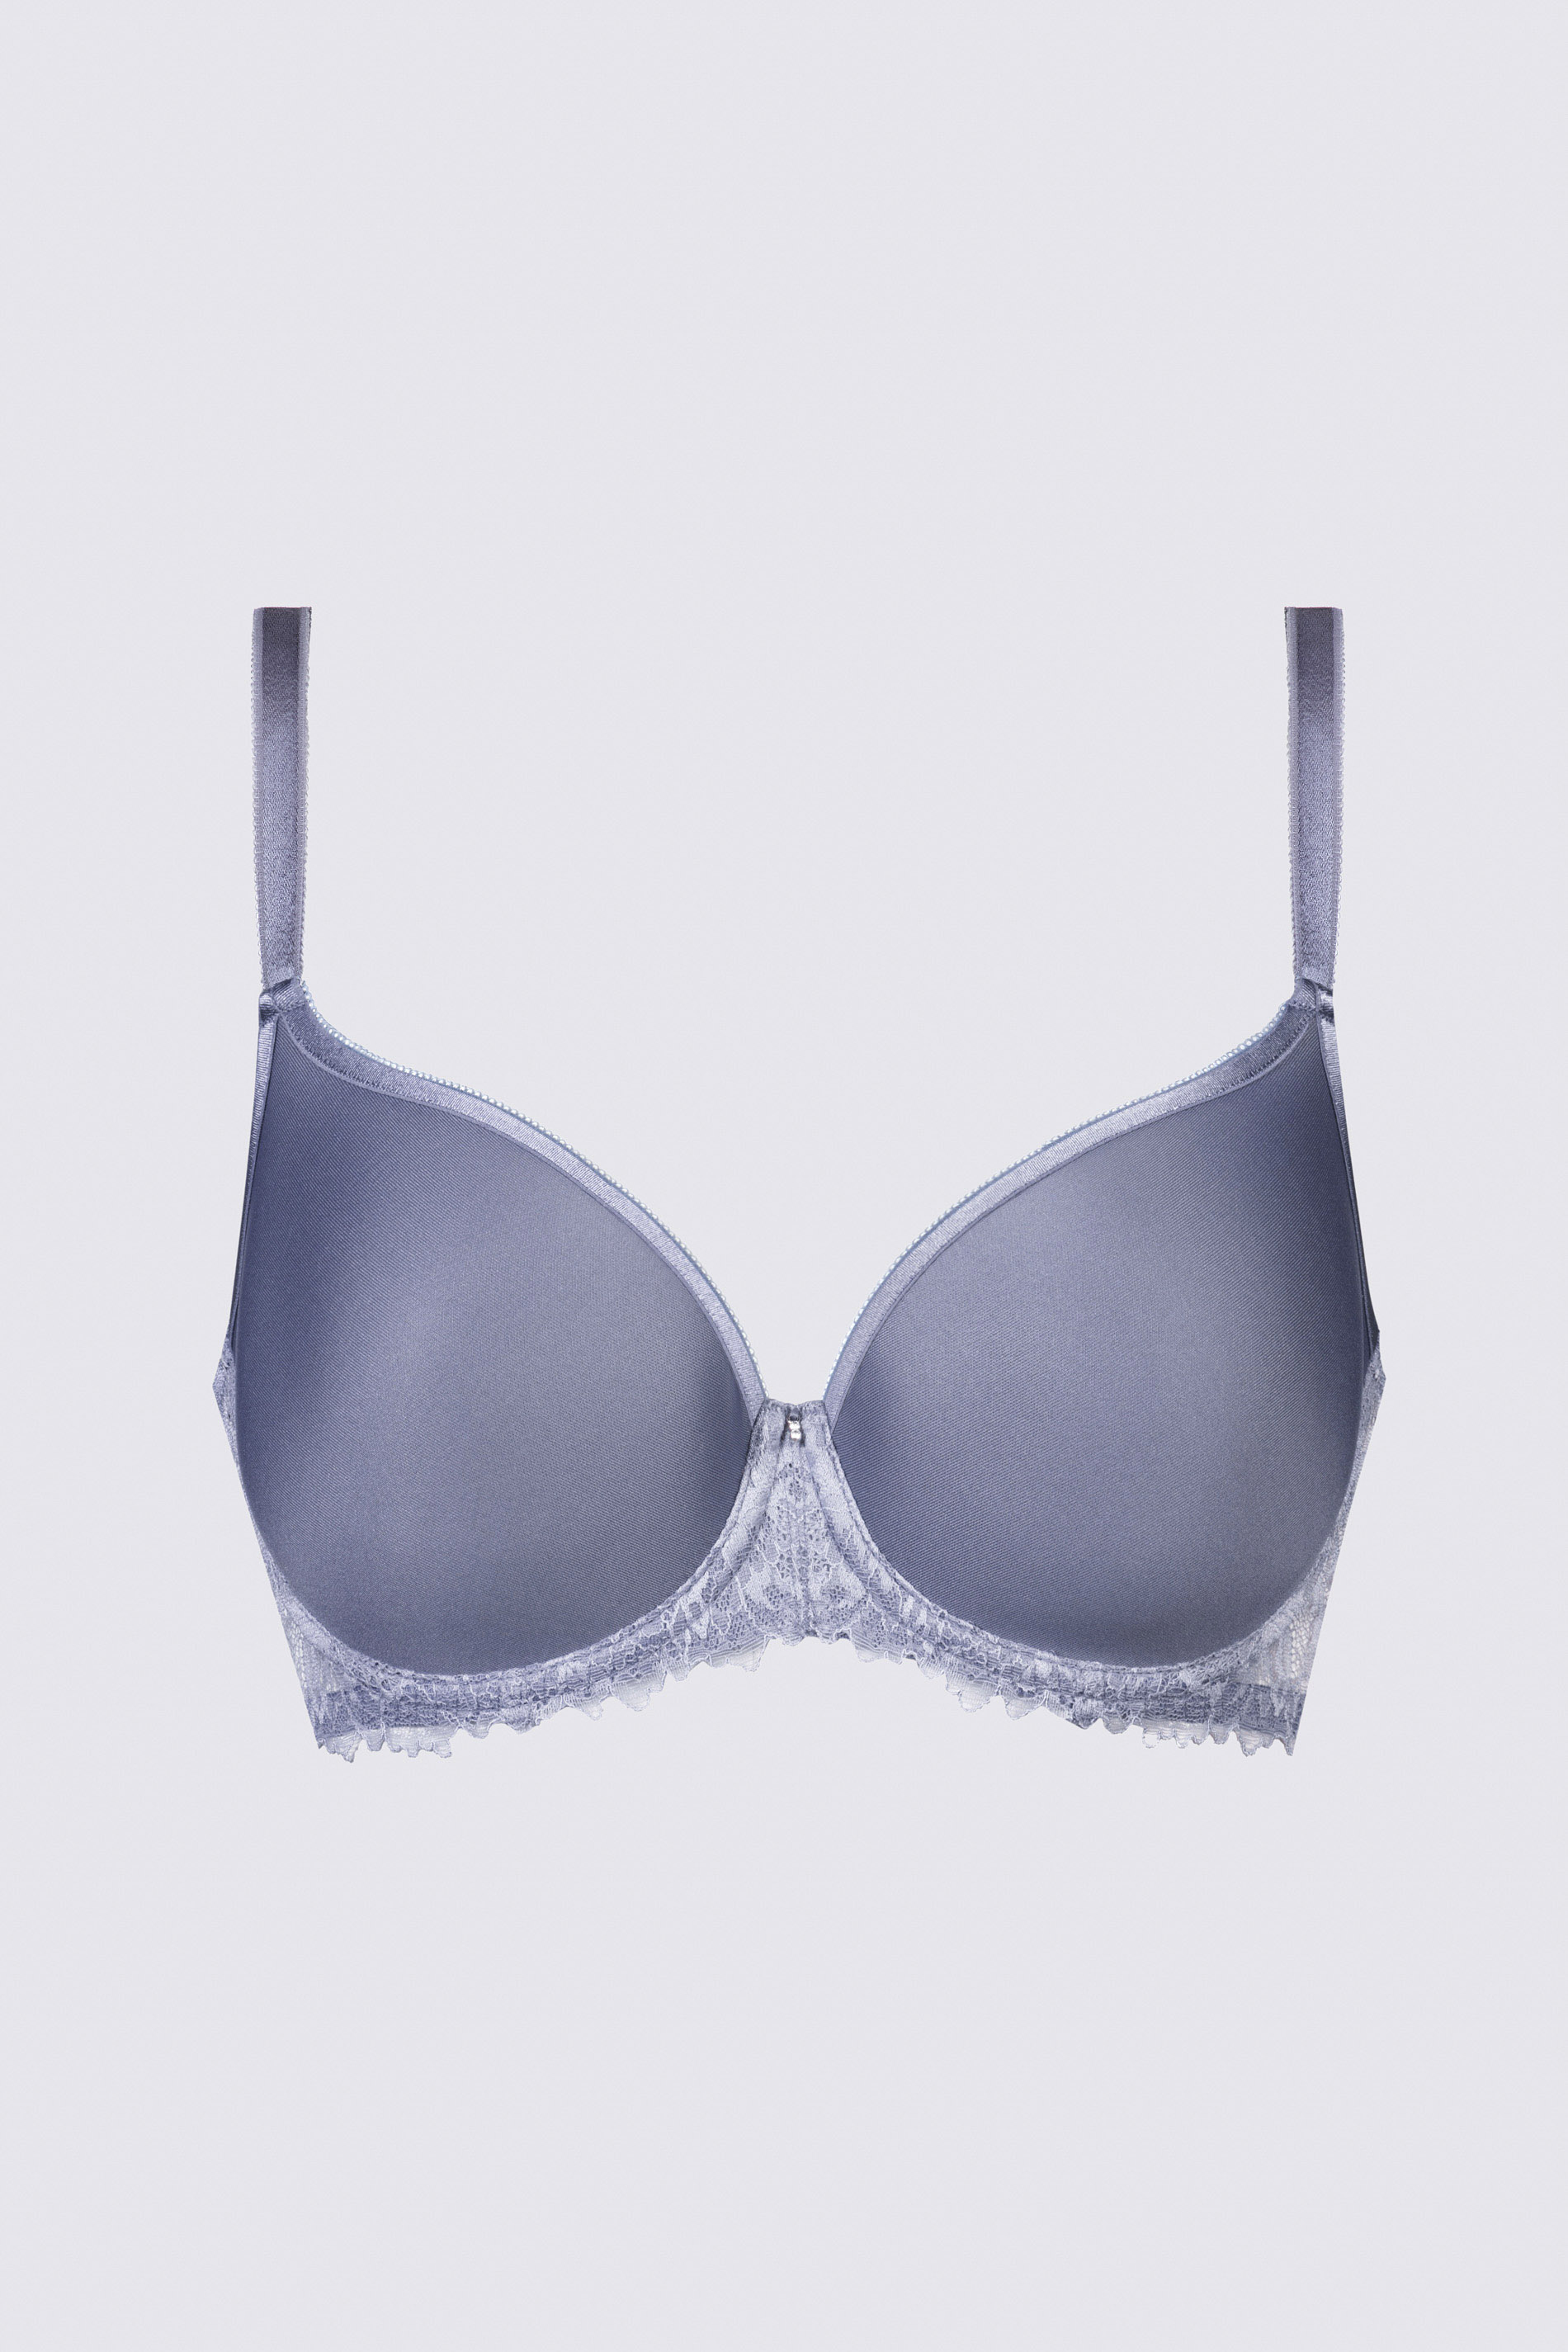 Spacer bra | Full Cup Dark Lavender Serie Luxurious Cut Out | mey®